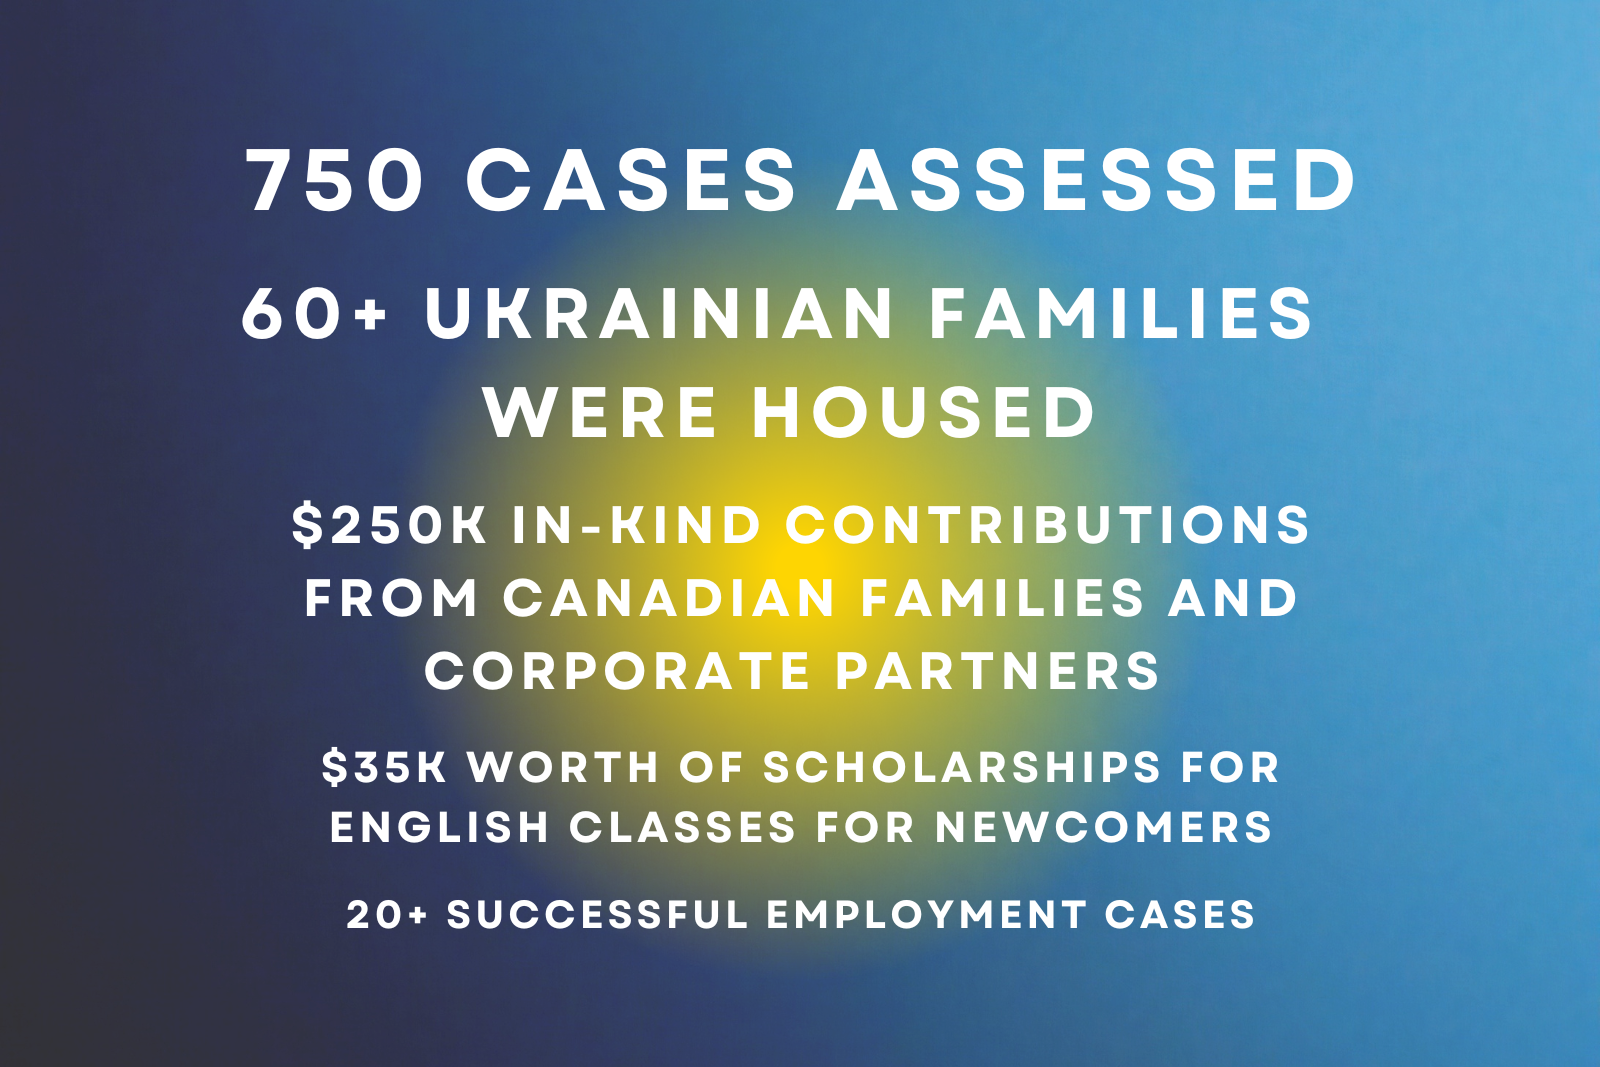 What We Achieved through the Ukrainian Displaced Assistance Program